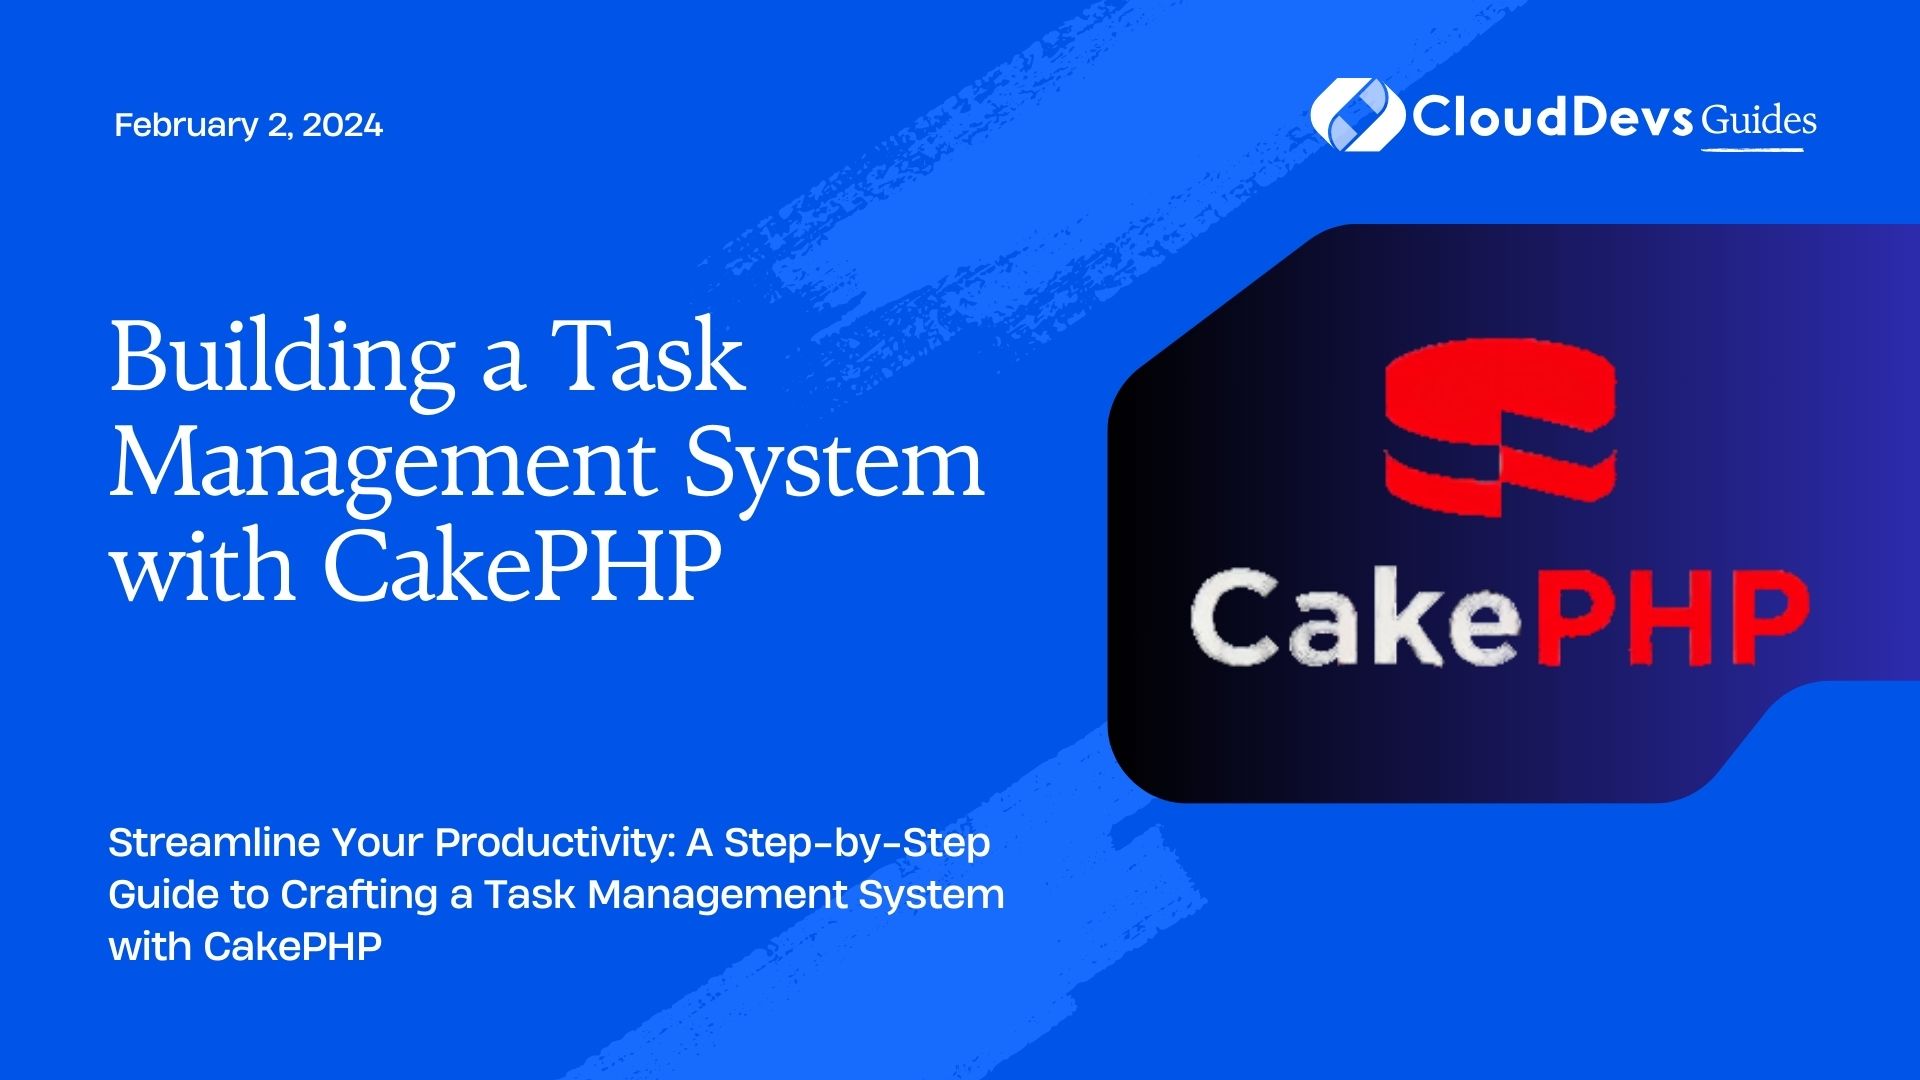 Building a Task Management System with CakePHP